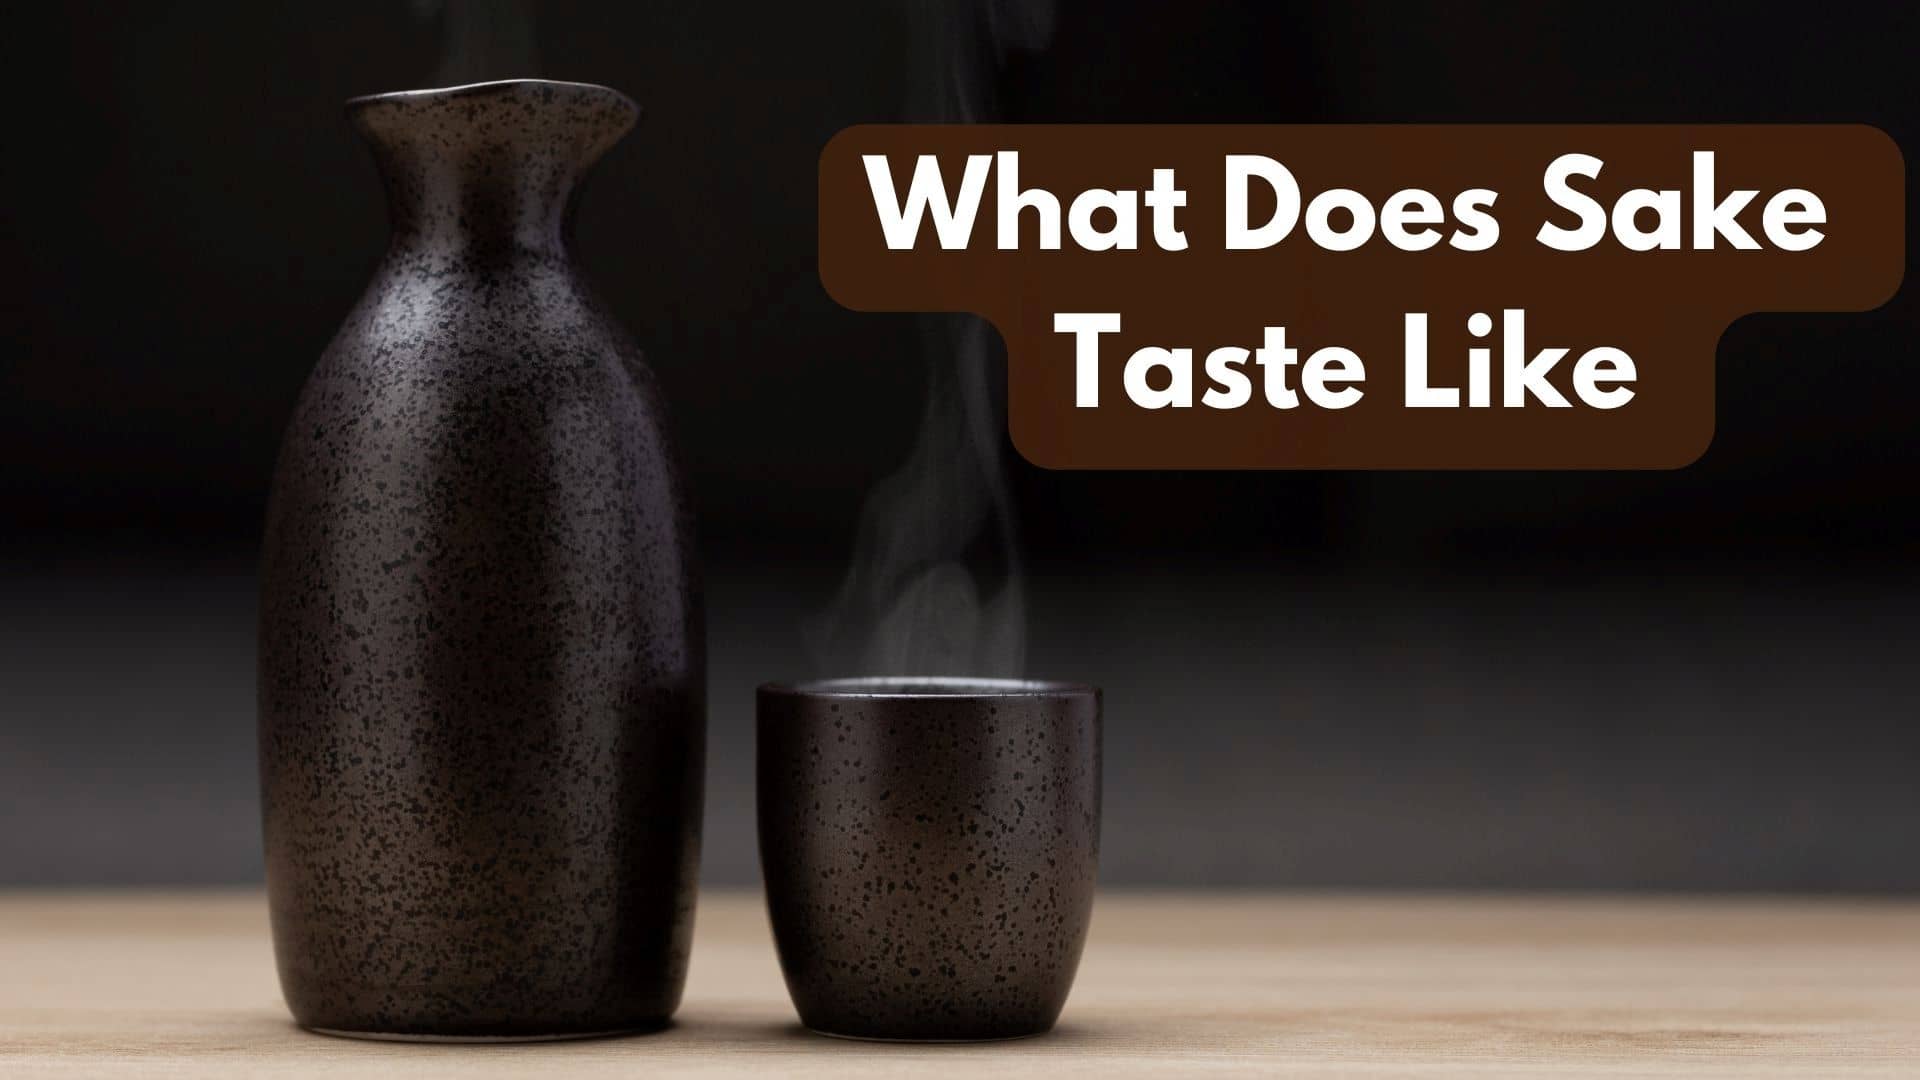 What Does Sake Taste Like In Comparison To Other Drinks?